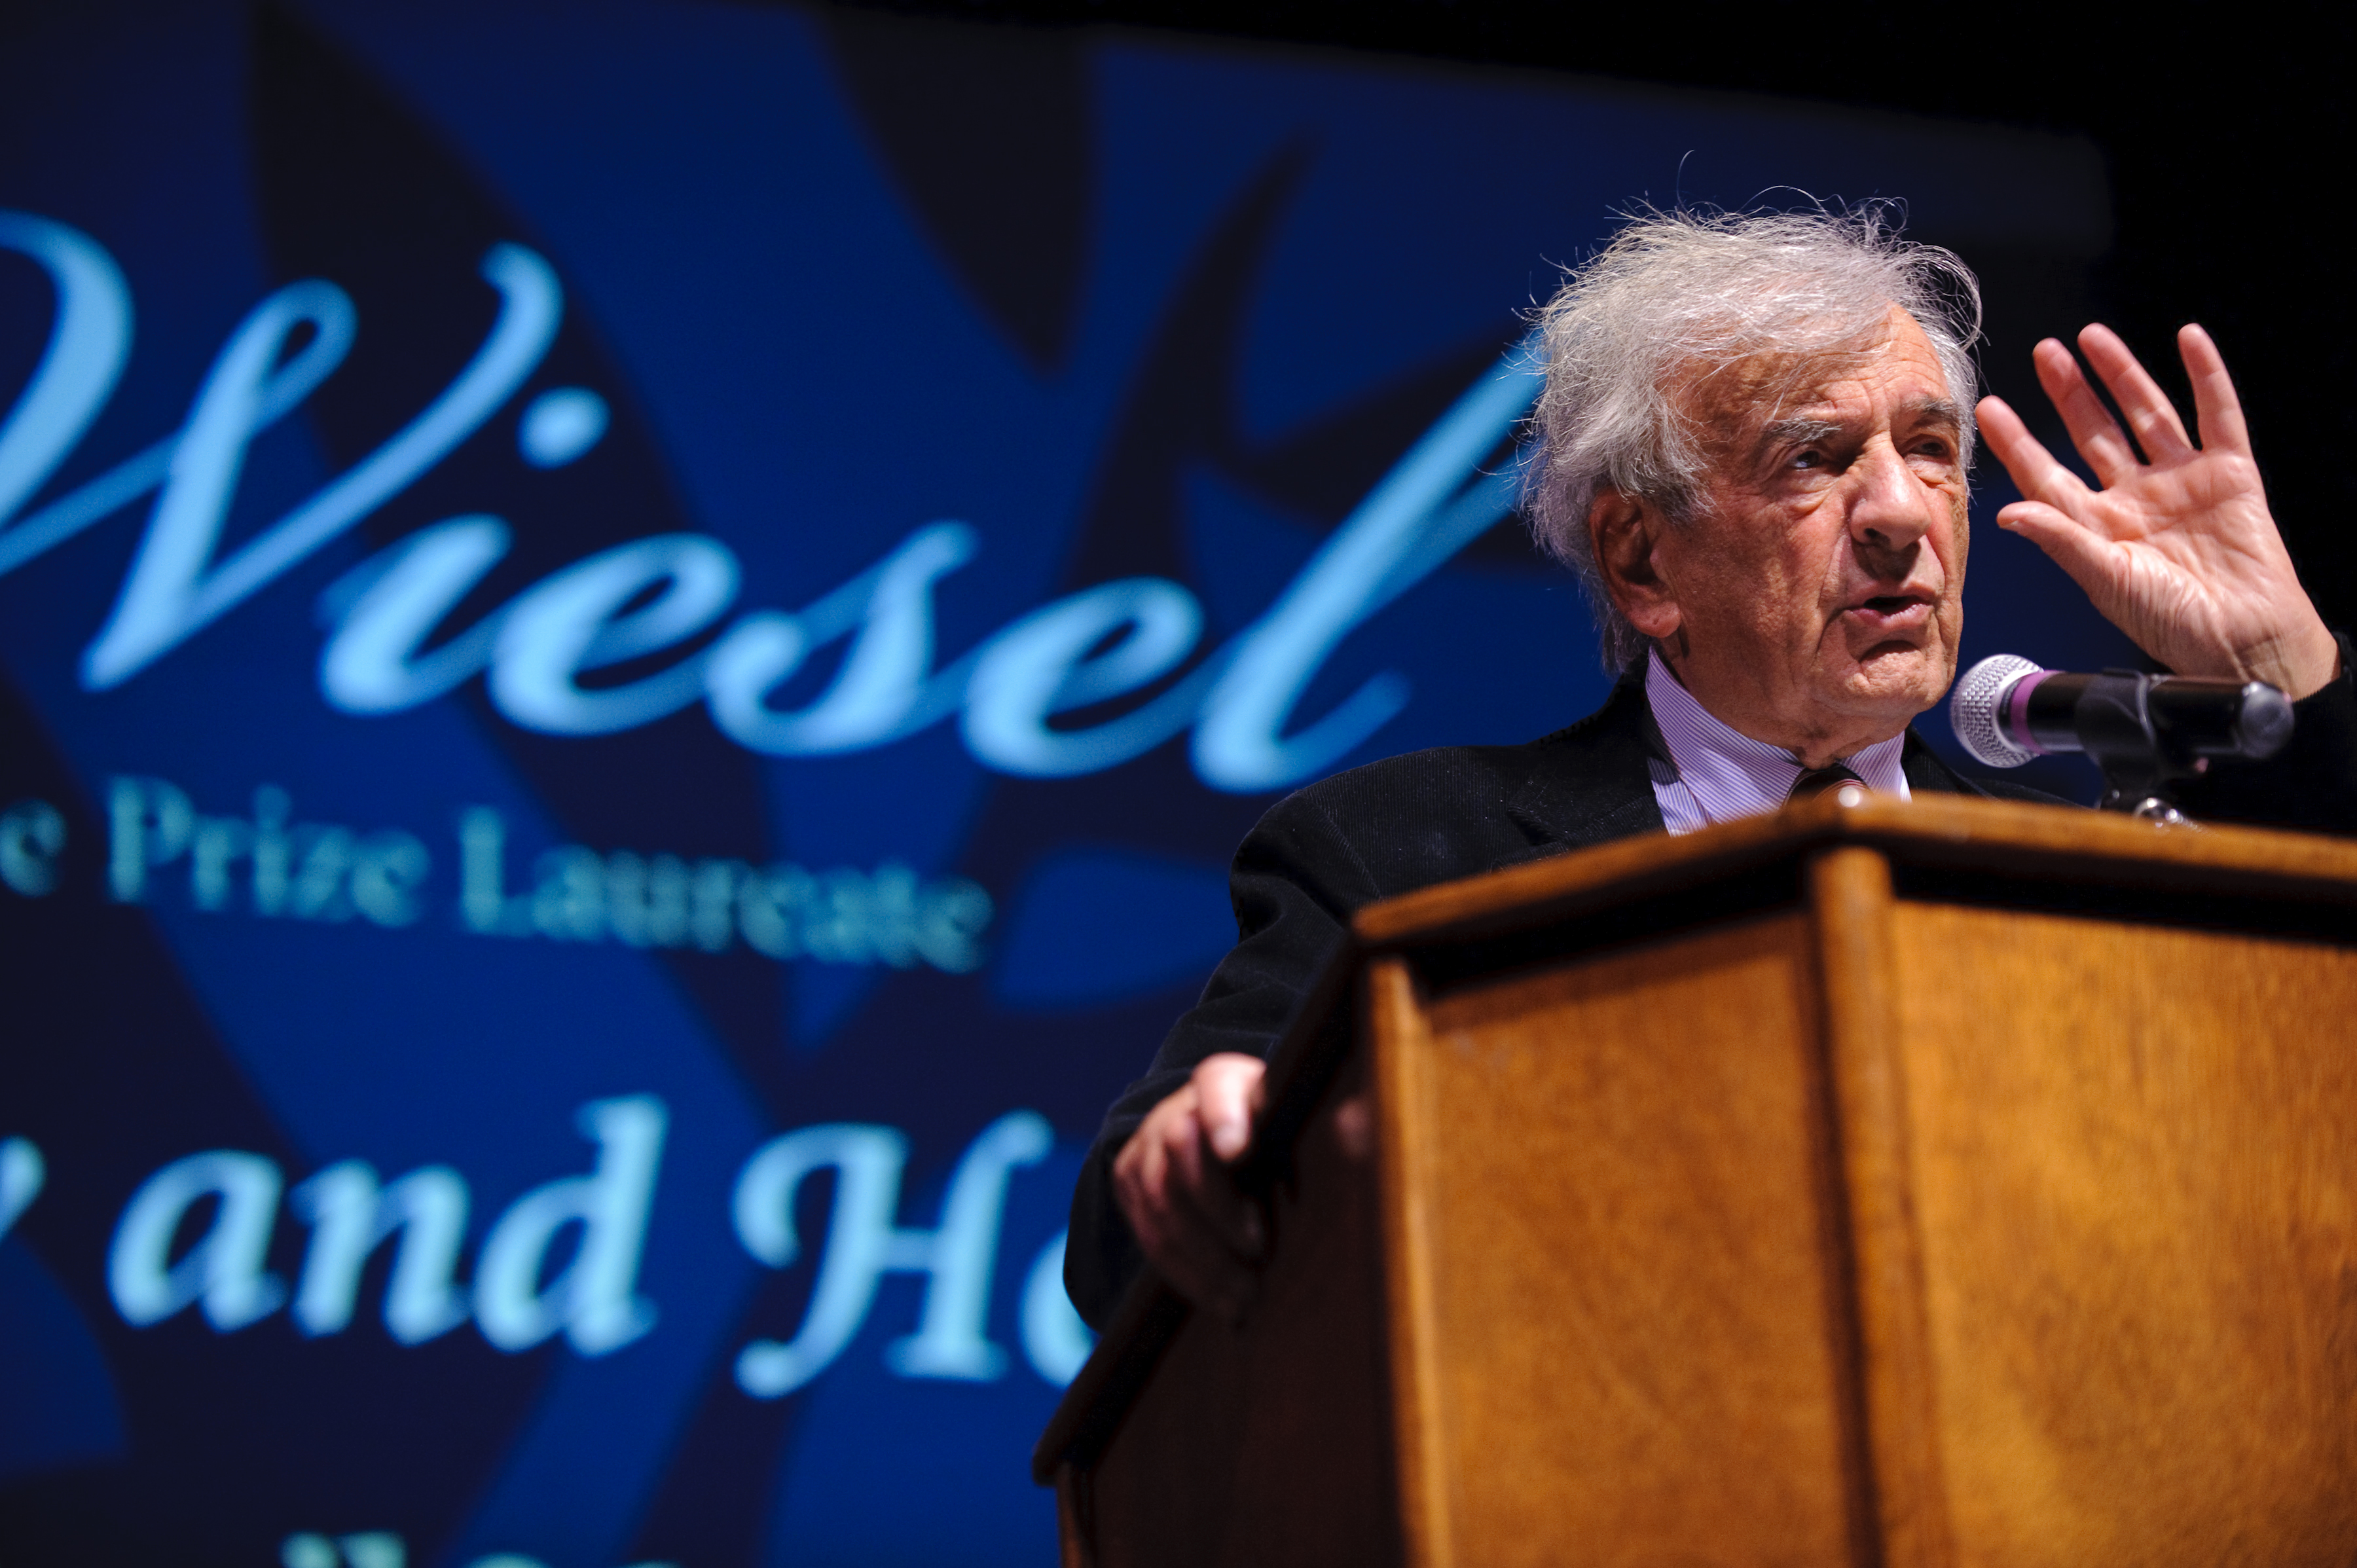 Elie Wiesel, pictured here during his 2010 visit, will return to campus for an April visit.